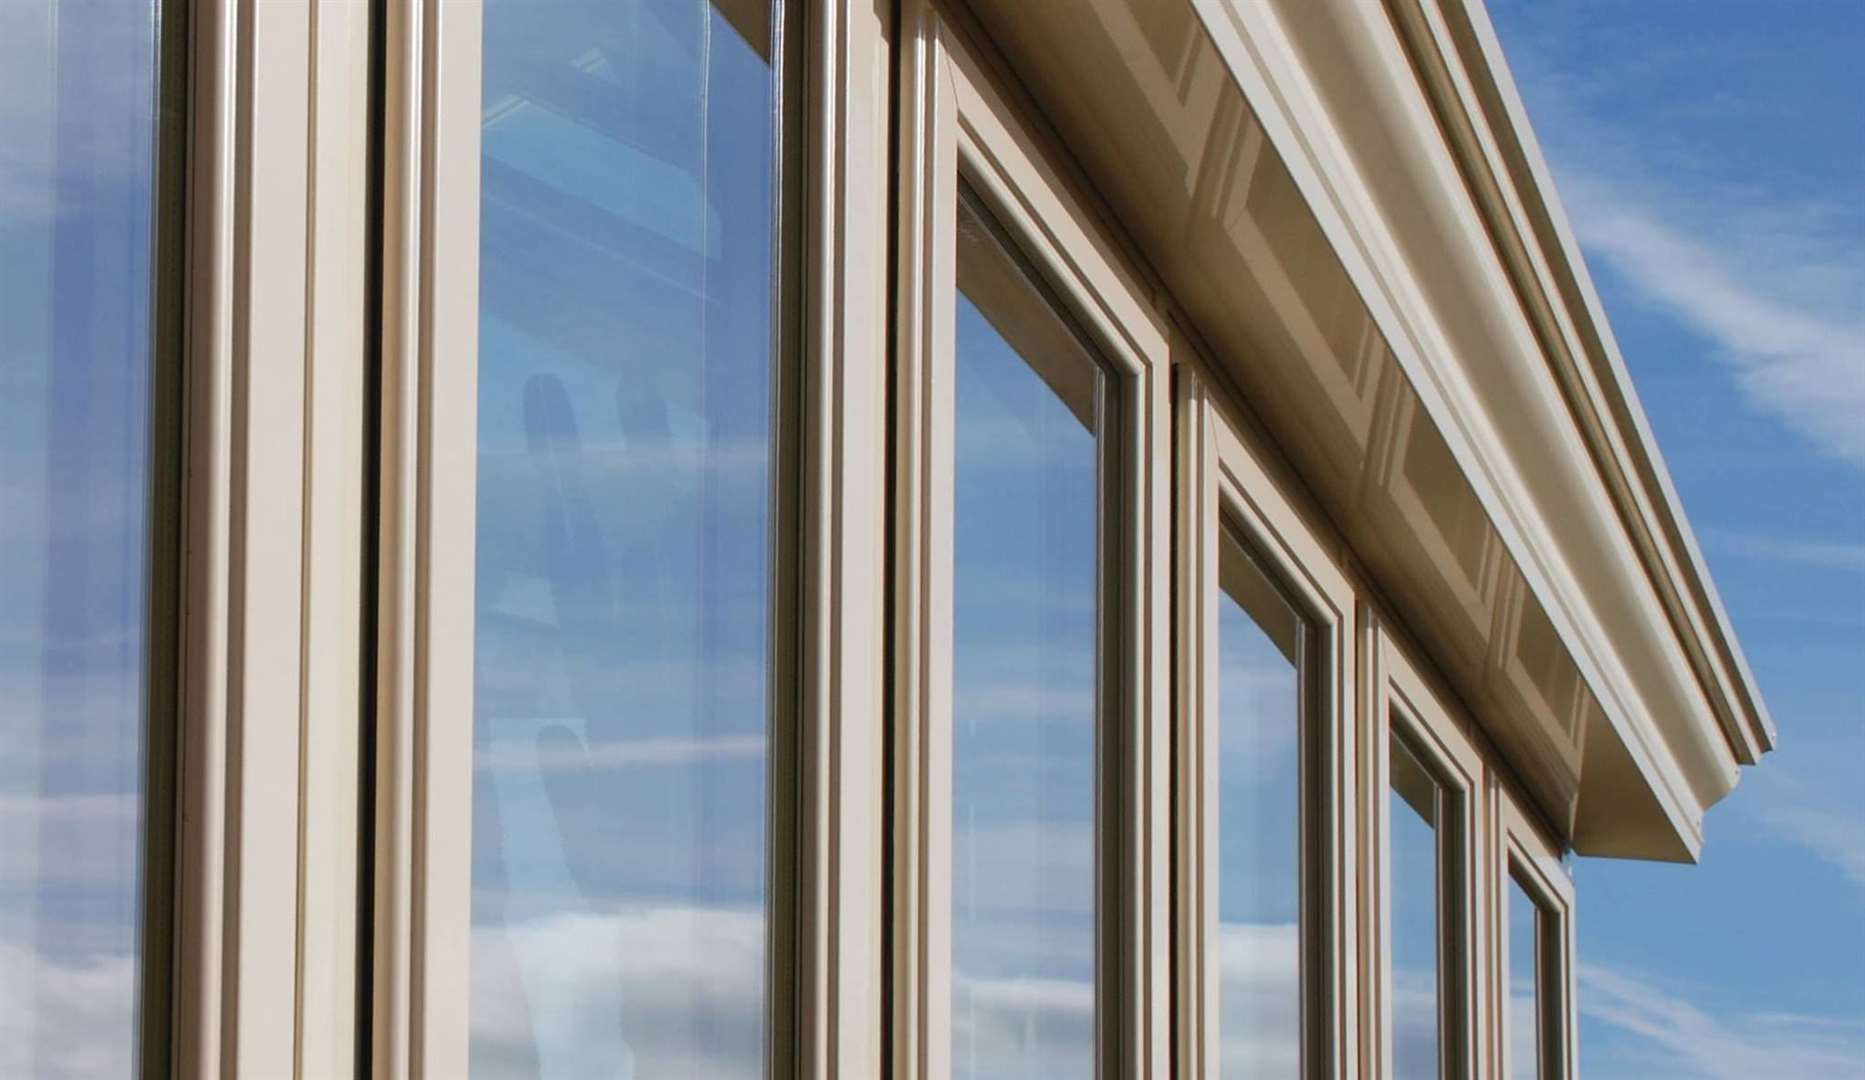 Switching from old single glazed windows to new PVCu double glazing will go a long way towards reducing the amount of money spent on heating a home.